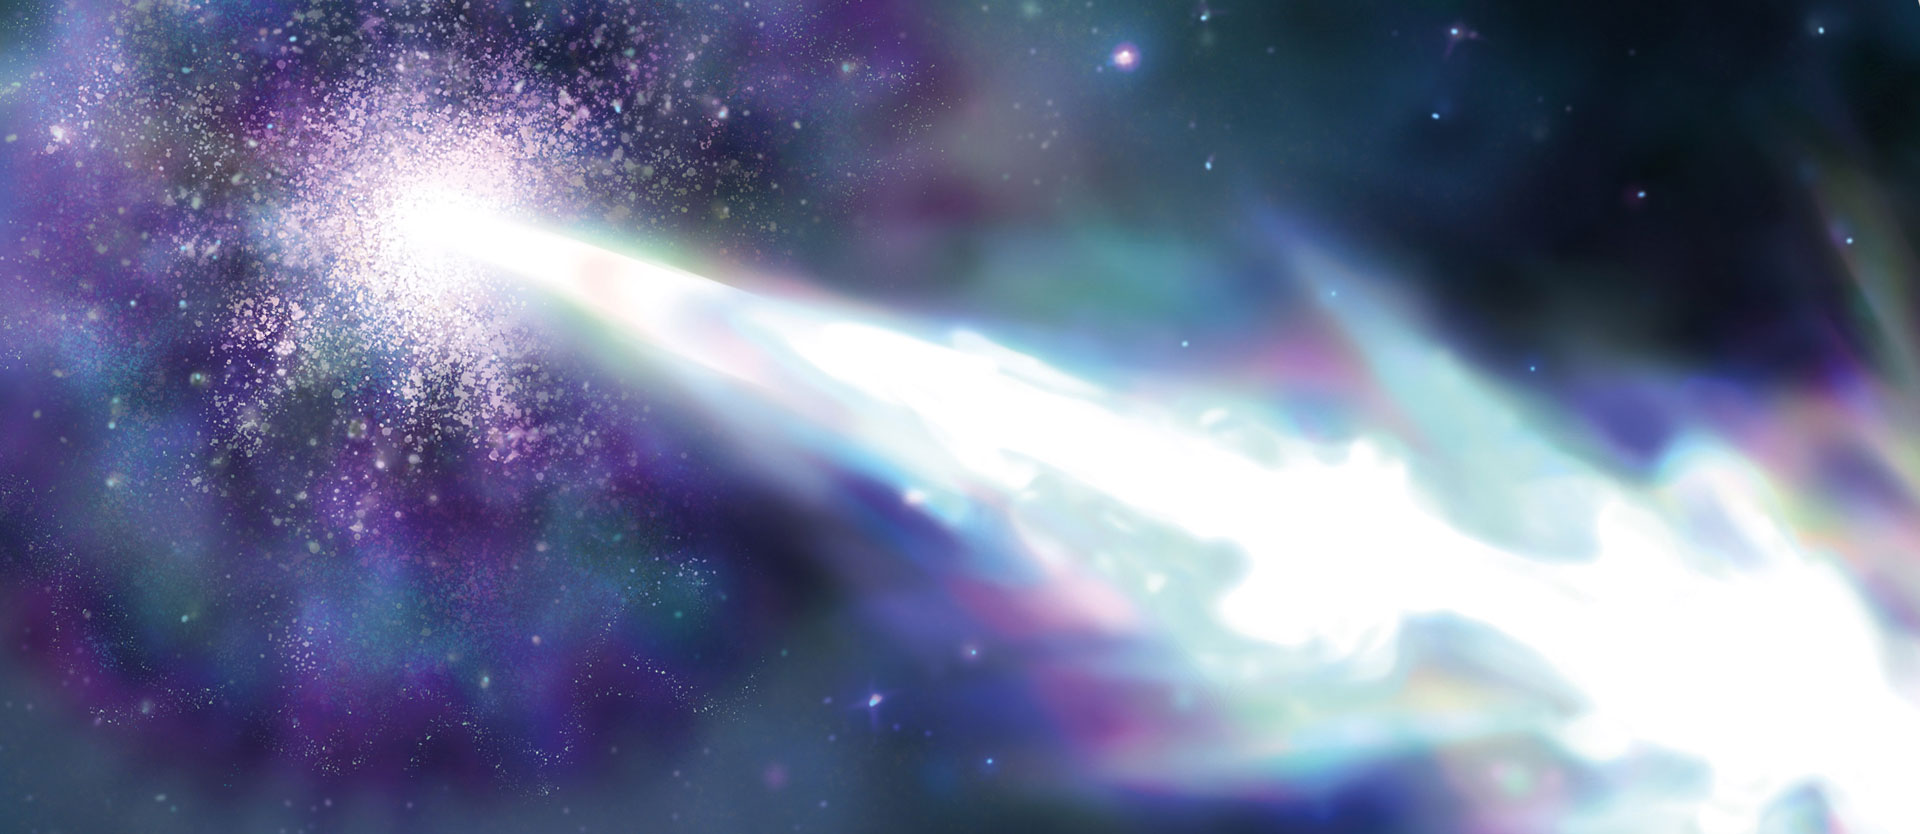 Detection of a Record-Breaking Gamma-Ray Burst